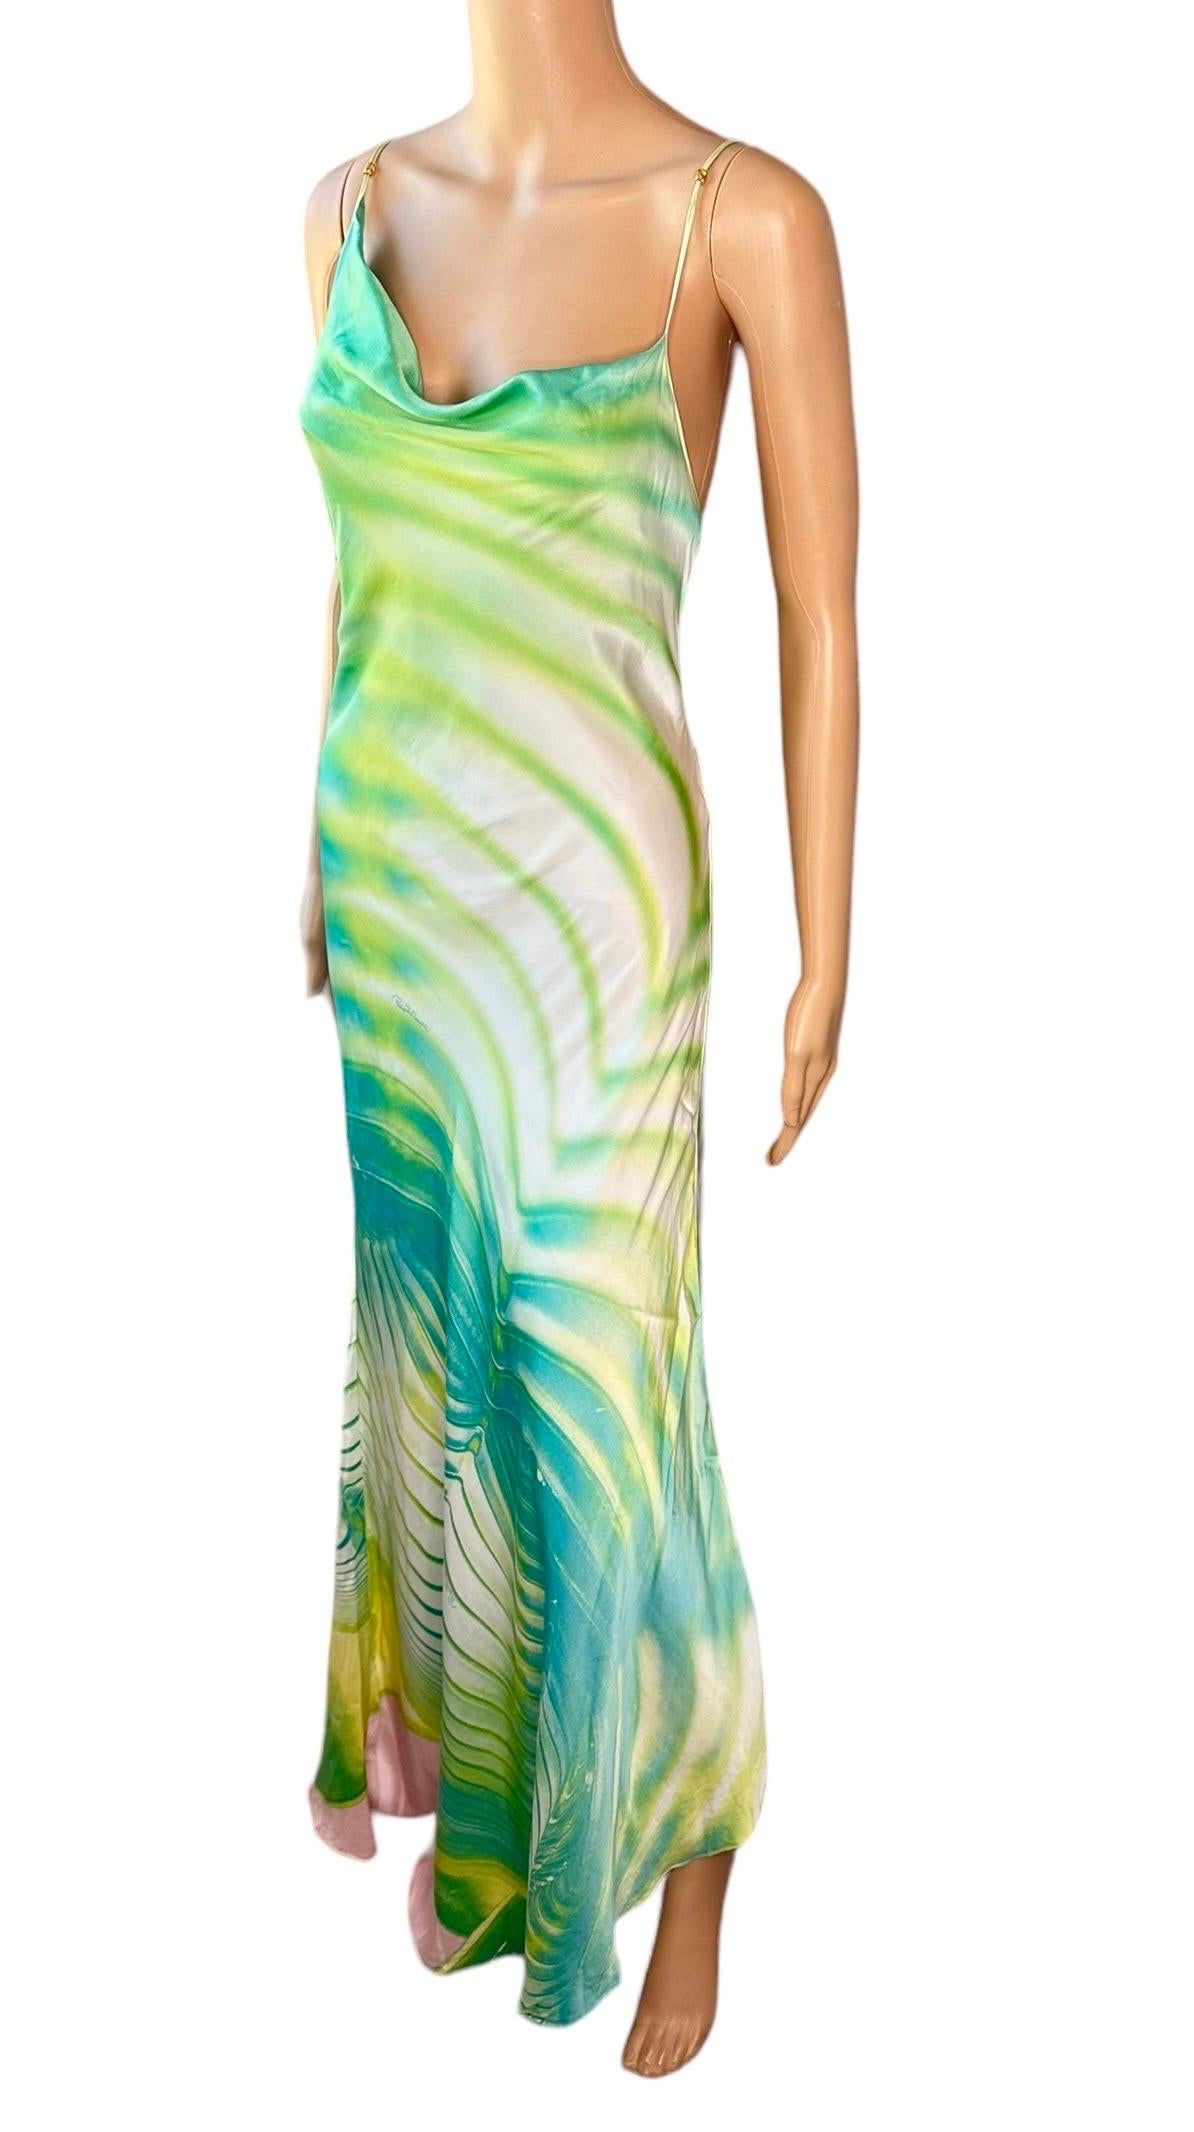 Roberto Cavalli S/S 2001 Psychedelic Print Plunging Neckine Backless Silk Slip Maxi Evening Dress Gown 